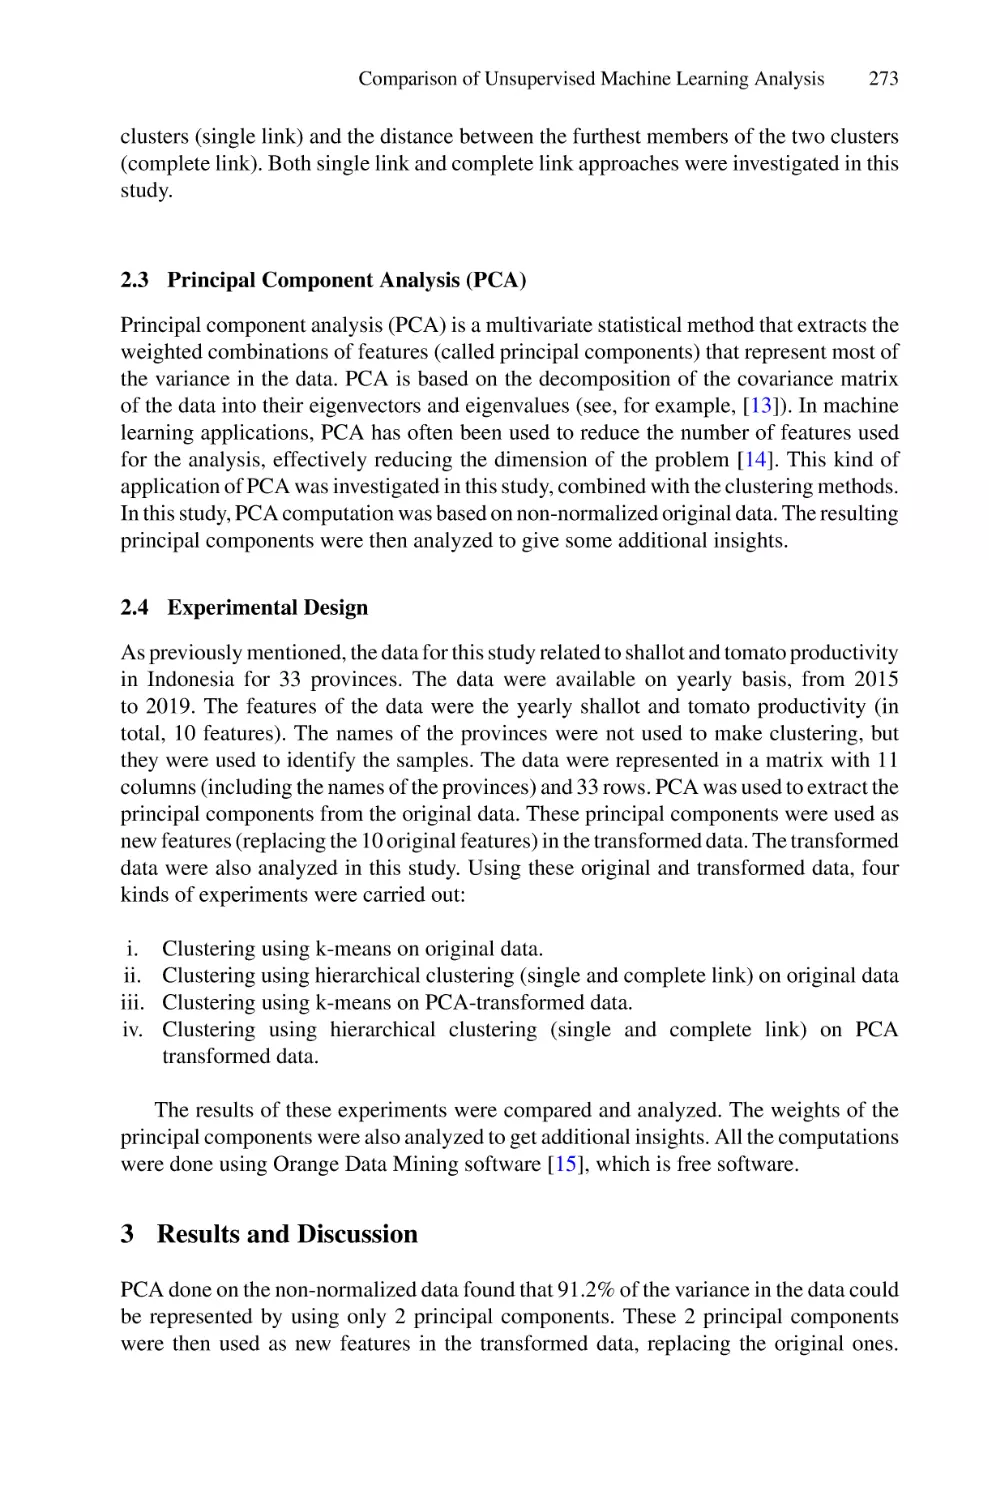 2.3 Principal Component Analysis (PCA)
2.4 Experimental Design
3 Results and Discussion